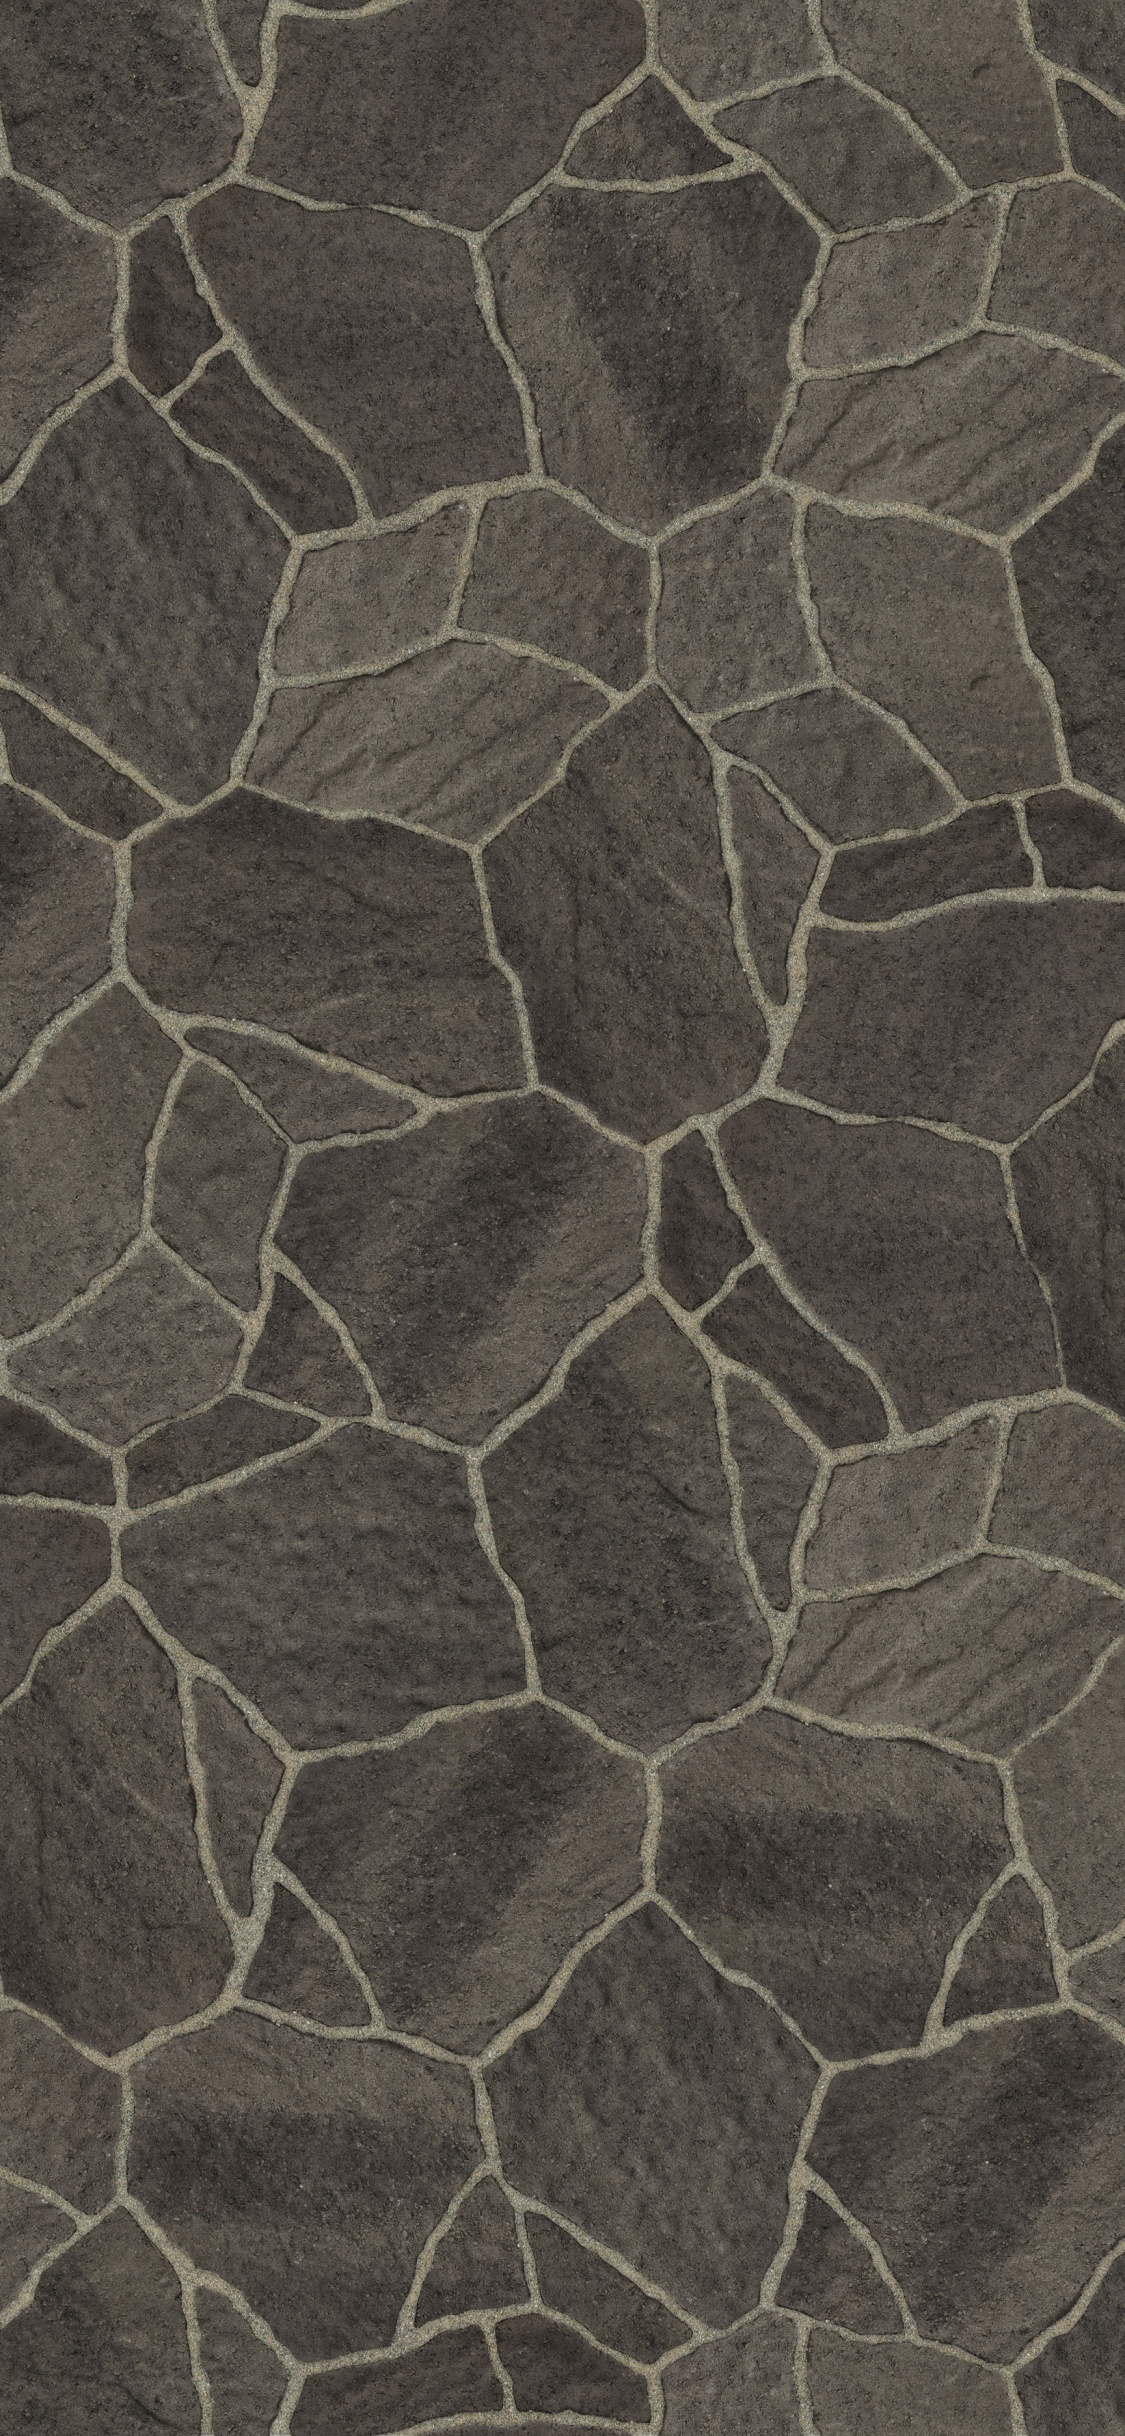 Brown and Black Concrete Floor. Wallpaper in 1125x2436 Resolution